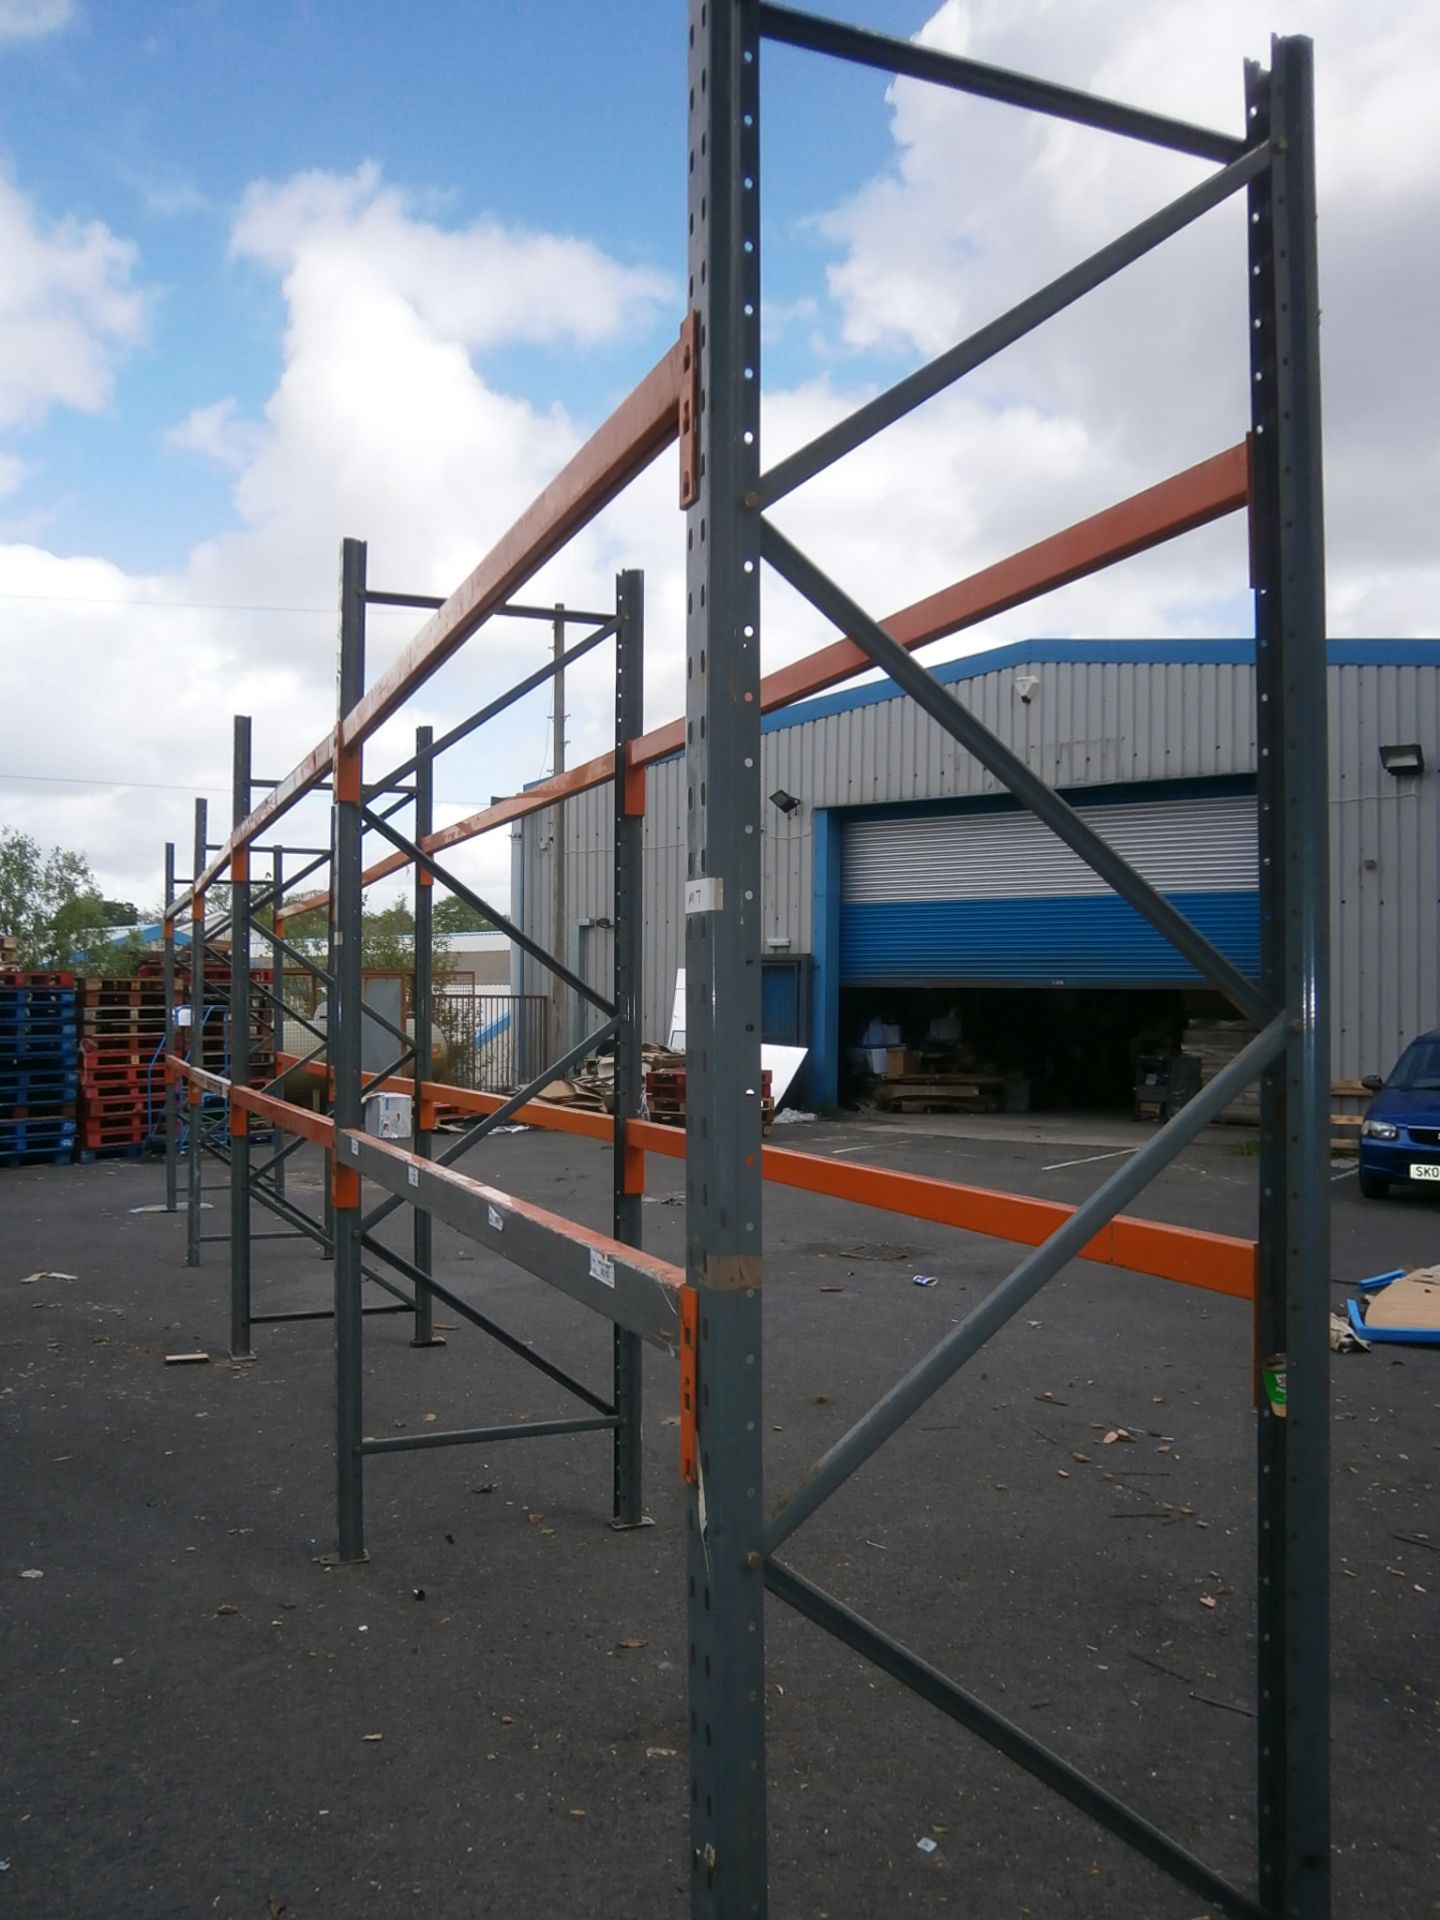 4 x Bays of Commercial Racking - Includes 5 x Uprights, 16 x Beams (Approx Per Bay H - 2900mm - Image 3 of 5